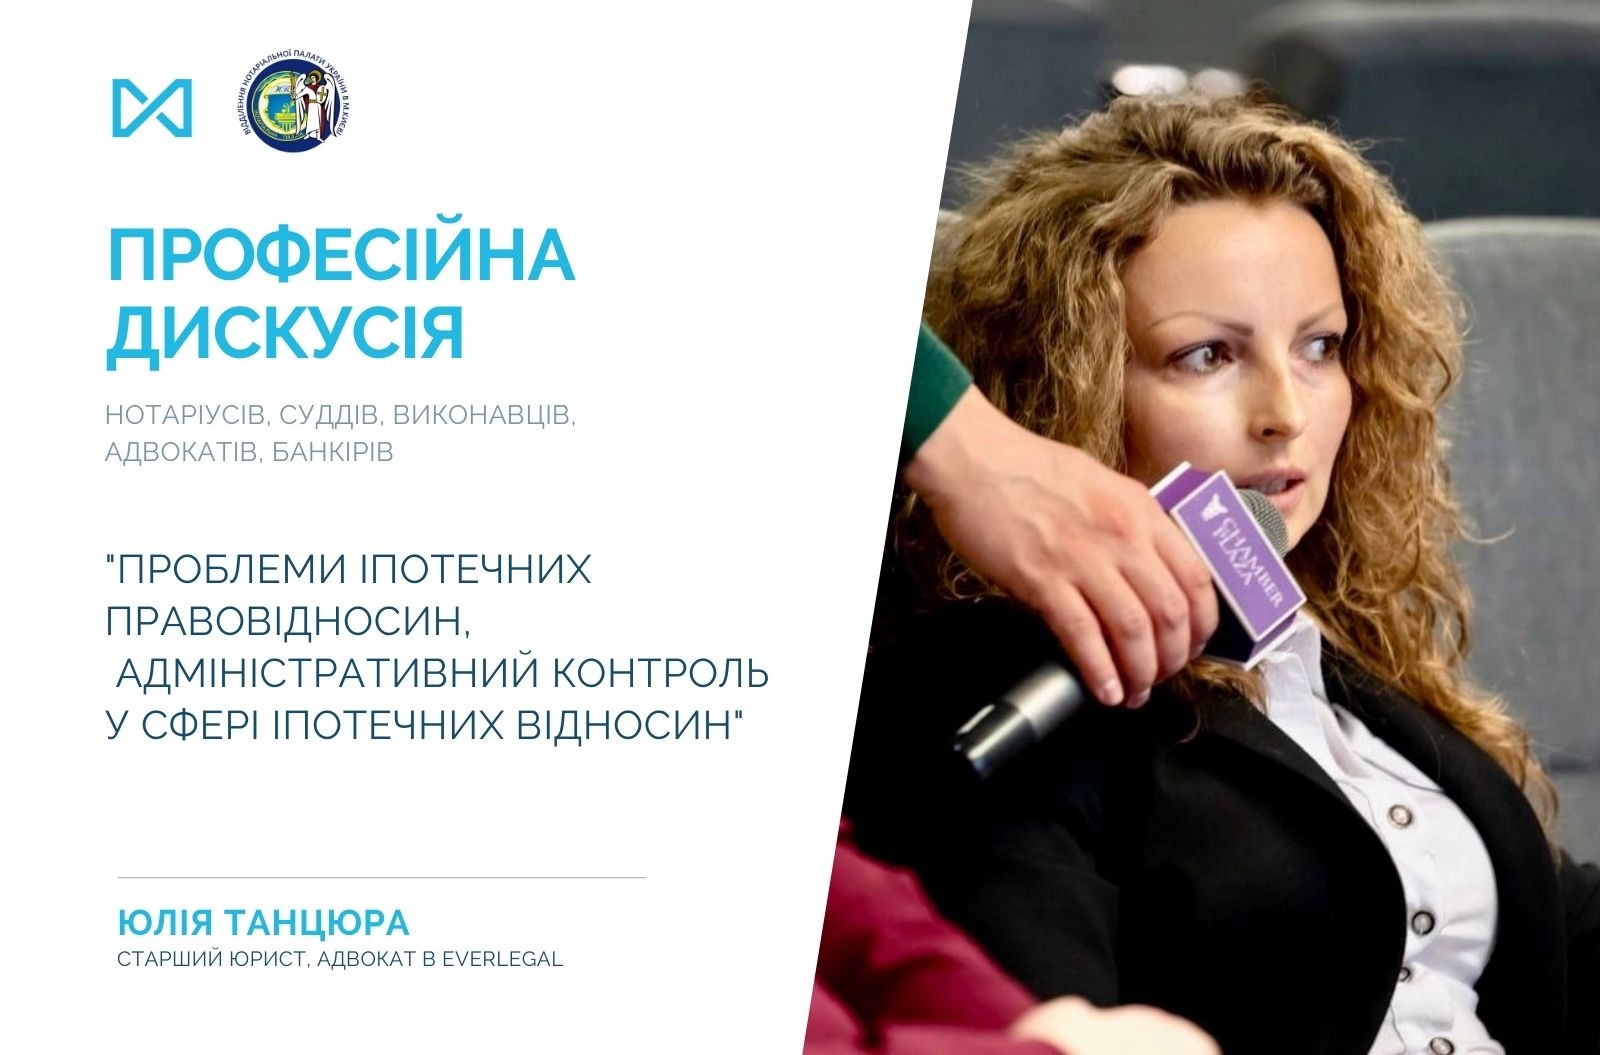 EVERLEGAL at the professional discussion organised by the Notary Chamber of Ukraine in Kyiv